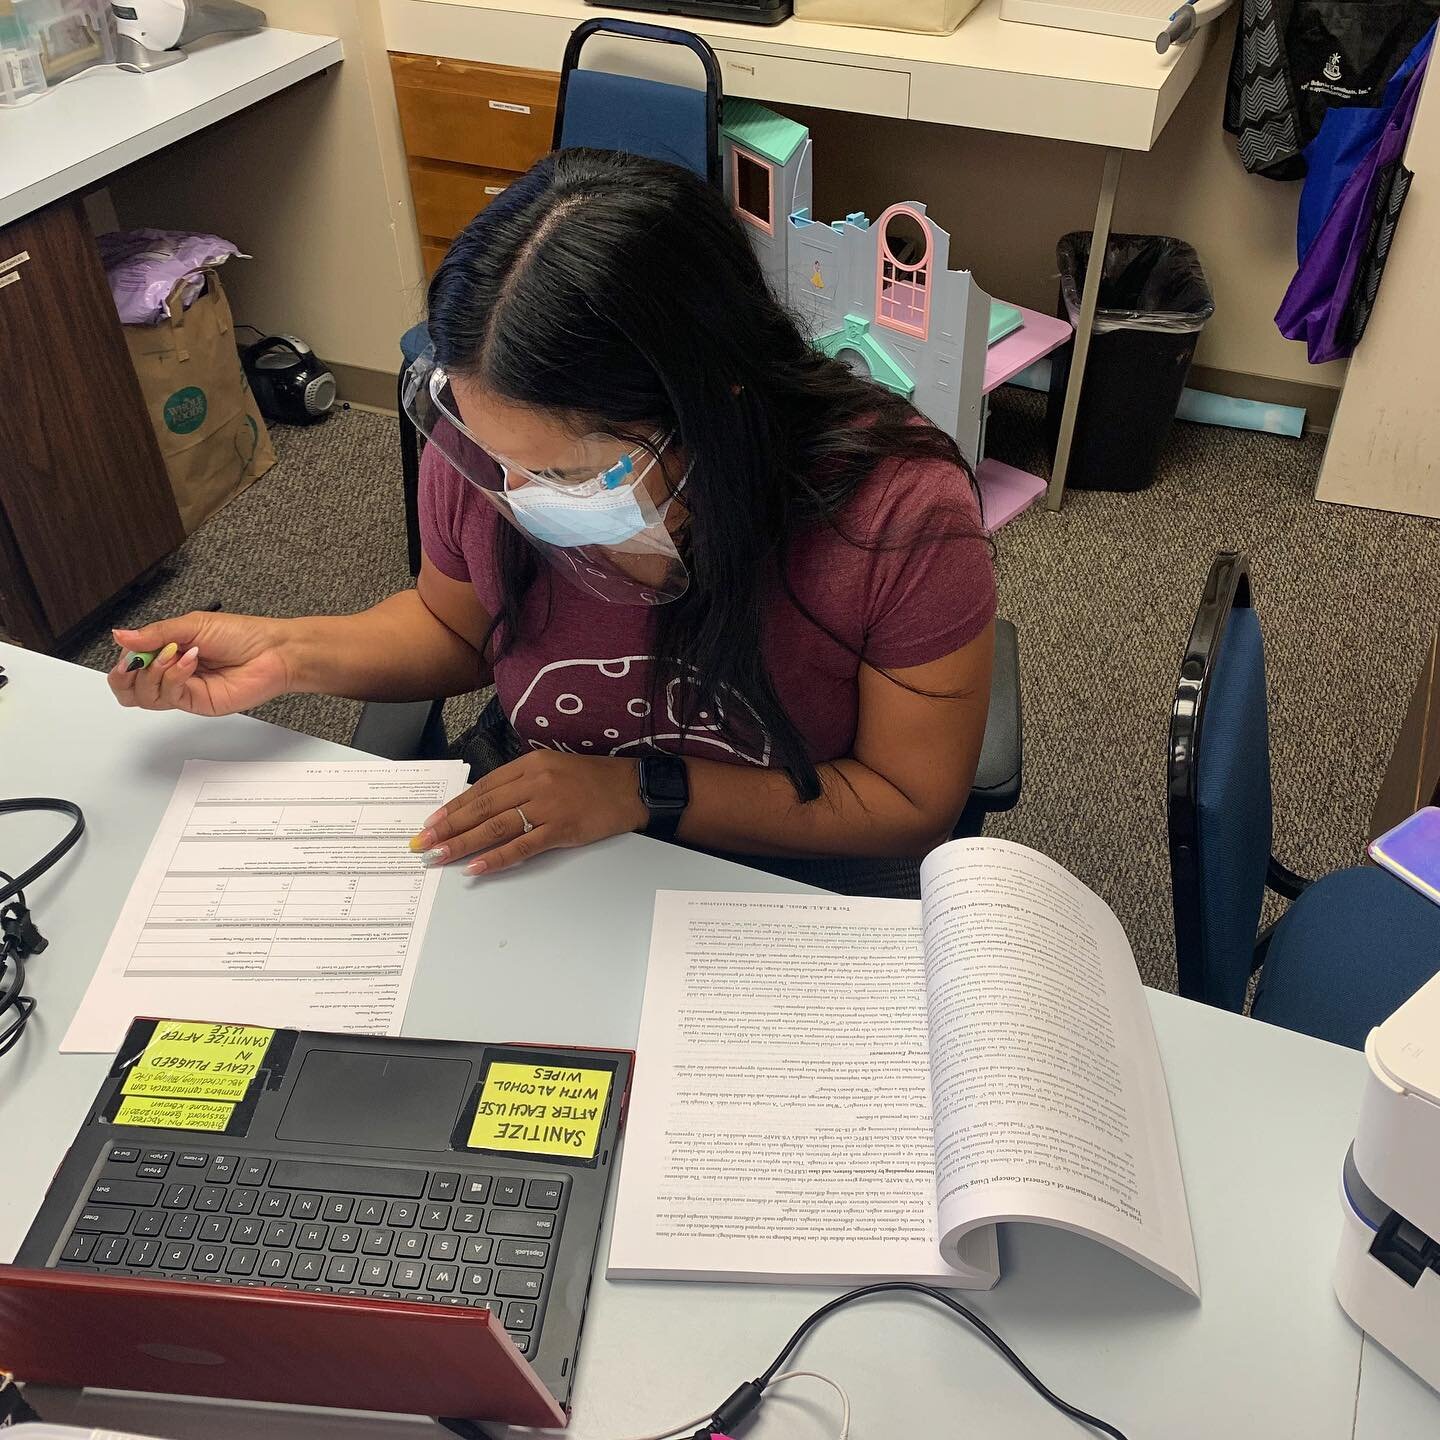 Lyzandra at #eastbayabc using her R.E.A.L. Model guidebook to complete a planning for generalization sheet for a client. Sign up for the FREE WEBINAR tomorrow at the link in bio to learn all about the @r.e.a.l.model from its creator!